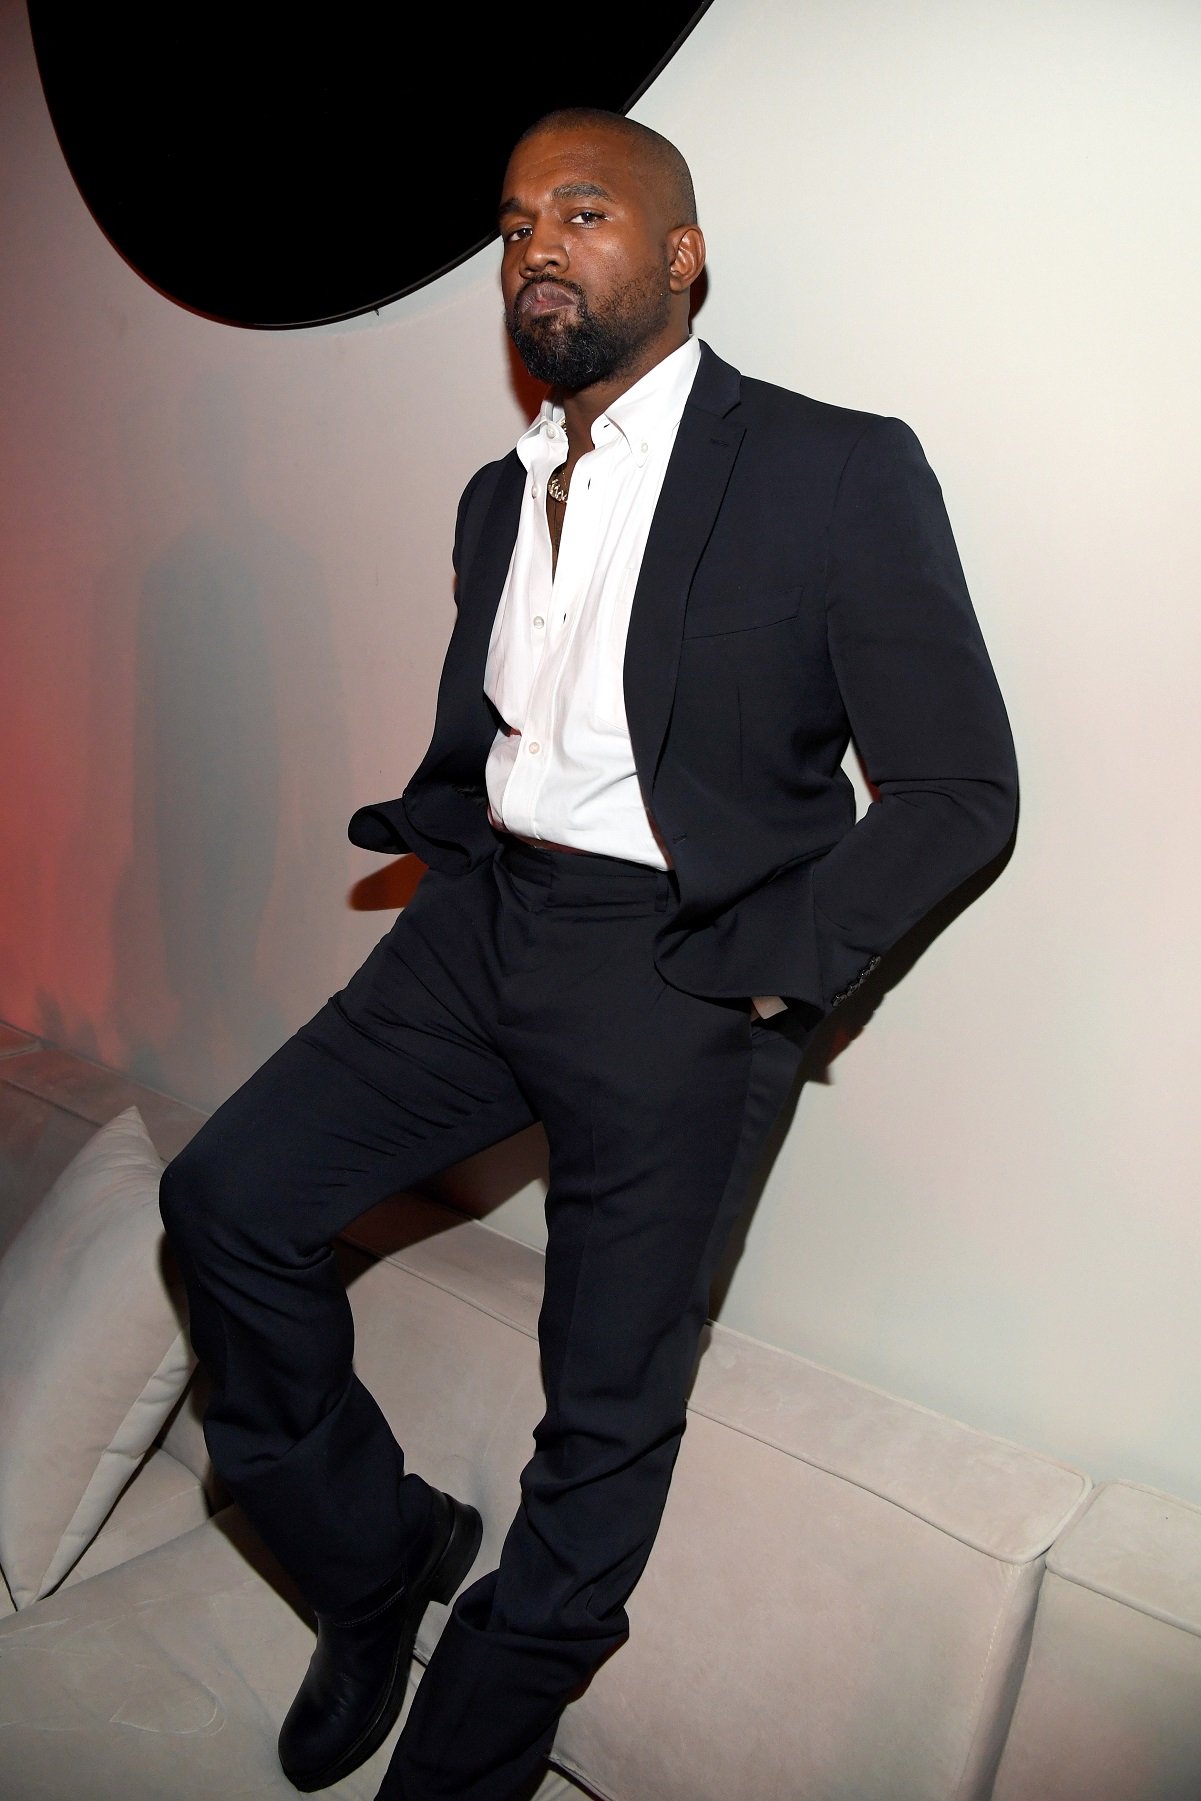 Kayne West dressed in a suit and standing on a couch at Sean Combs' 50th birthday party